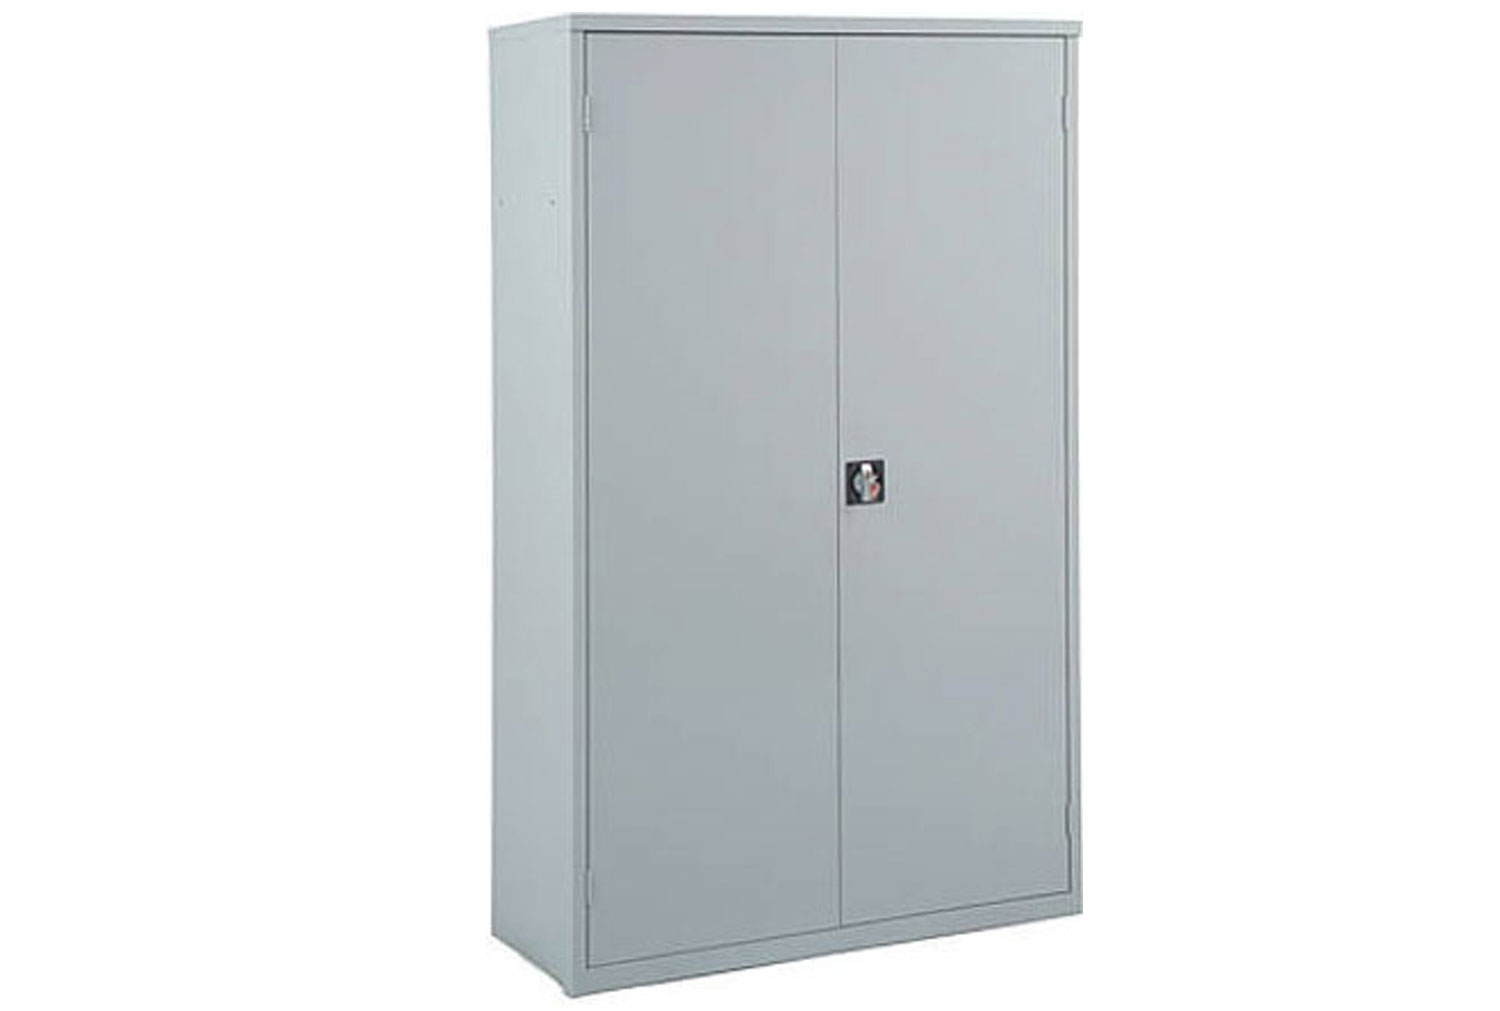 Lockable Storage Cupboard With 63 Gratnells Trays, Red Trays, Express Delivery